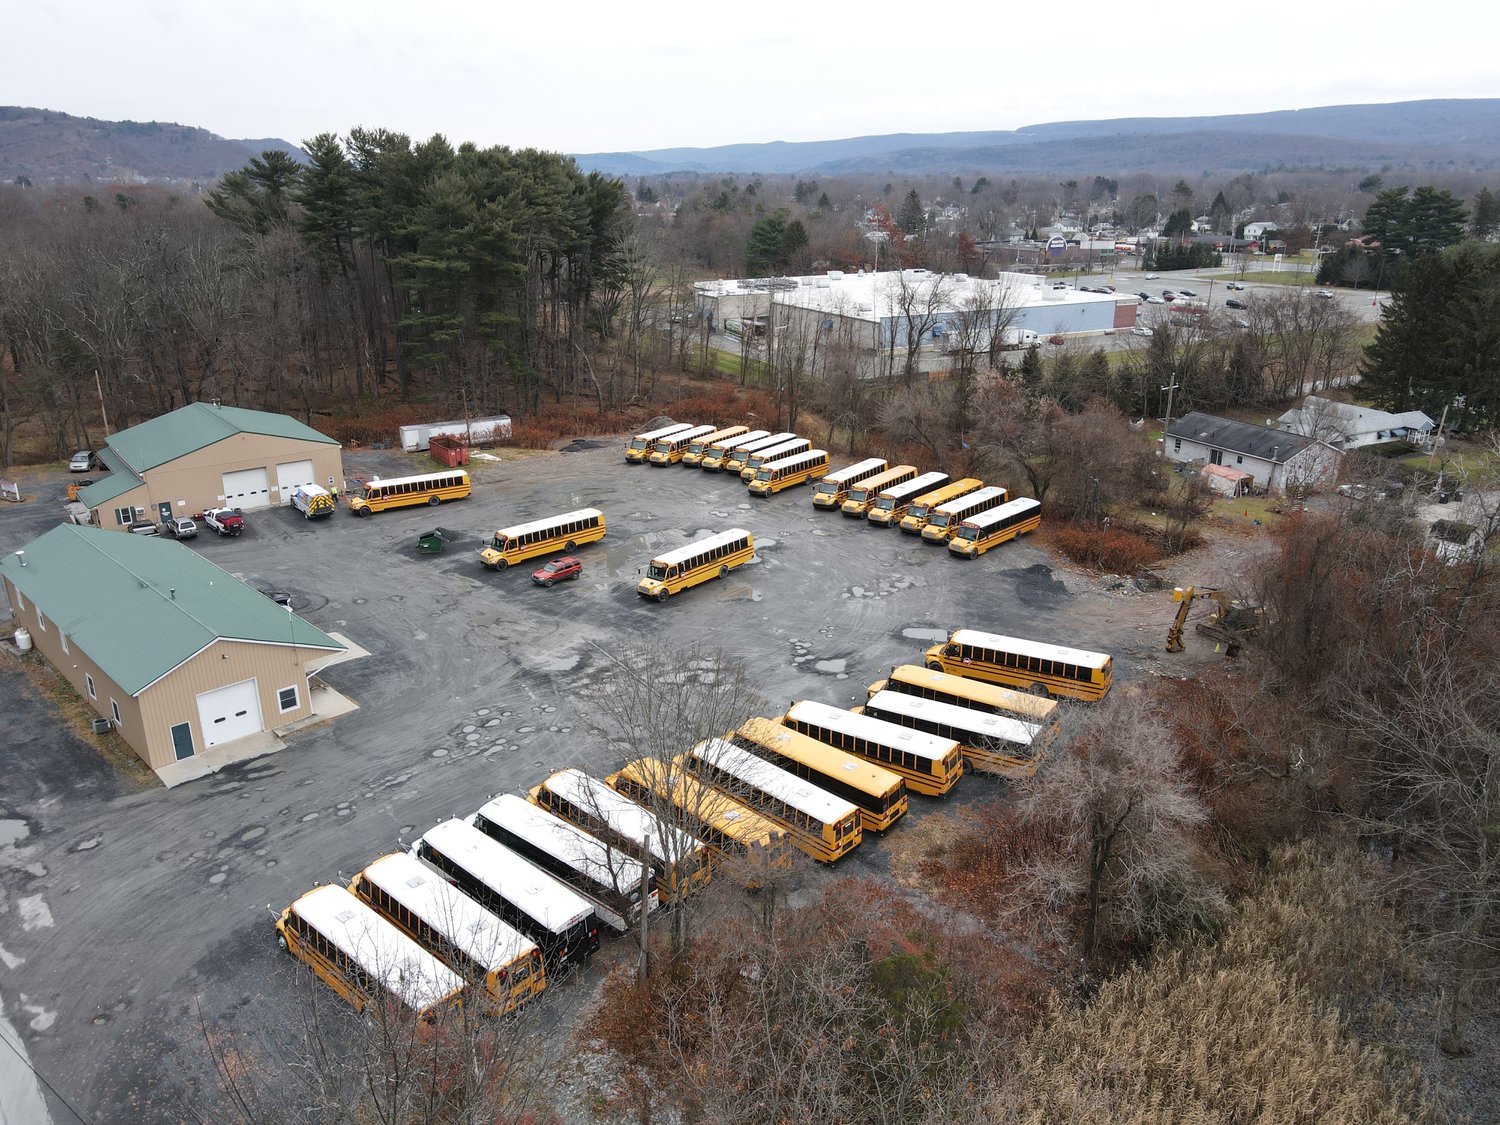 The parking lot at the Delaware Valley School District bus garage is empty on December 7, due to a bus driver shortage following COVID-19 exposure.